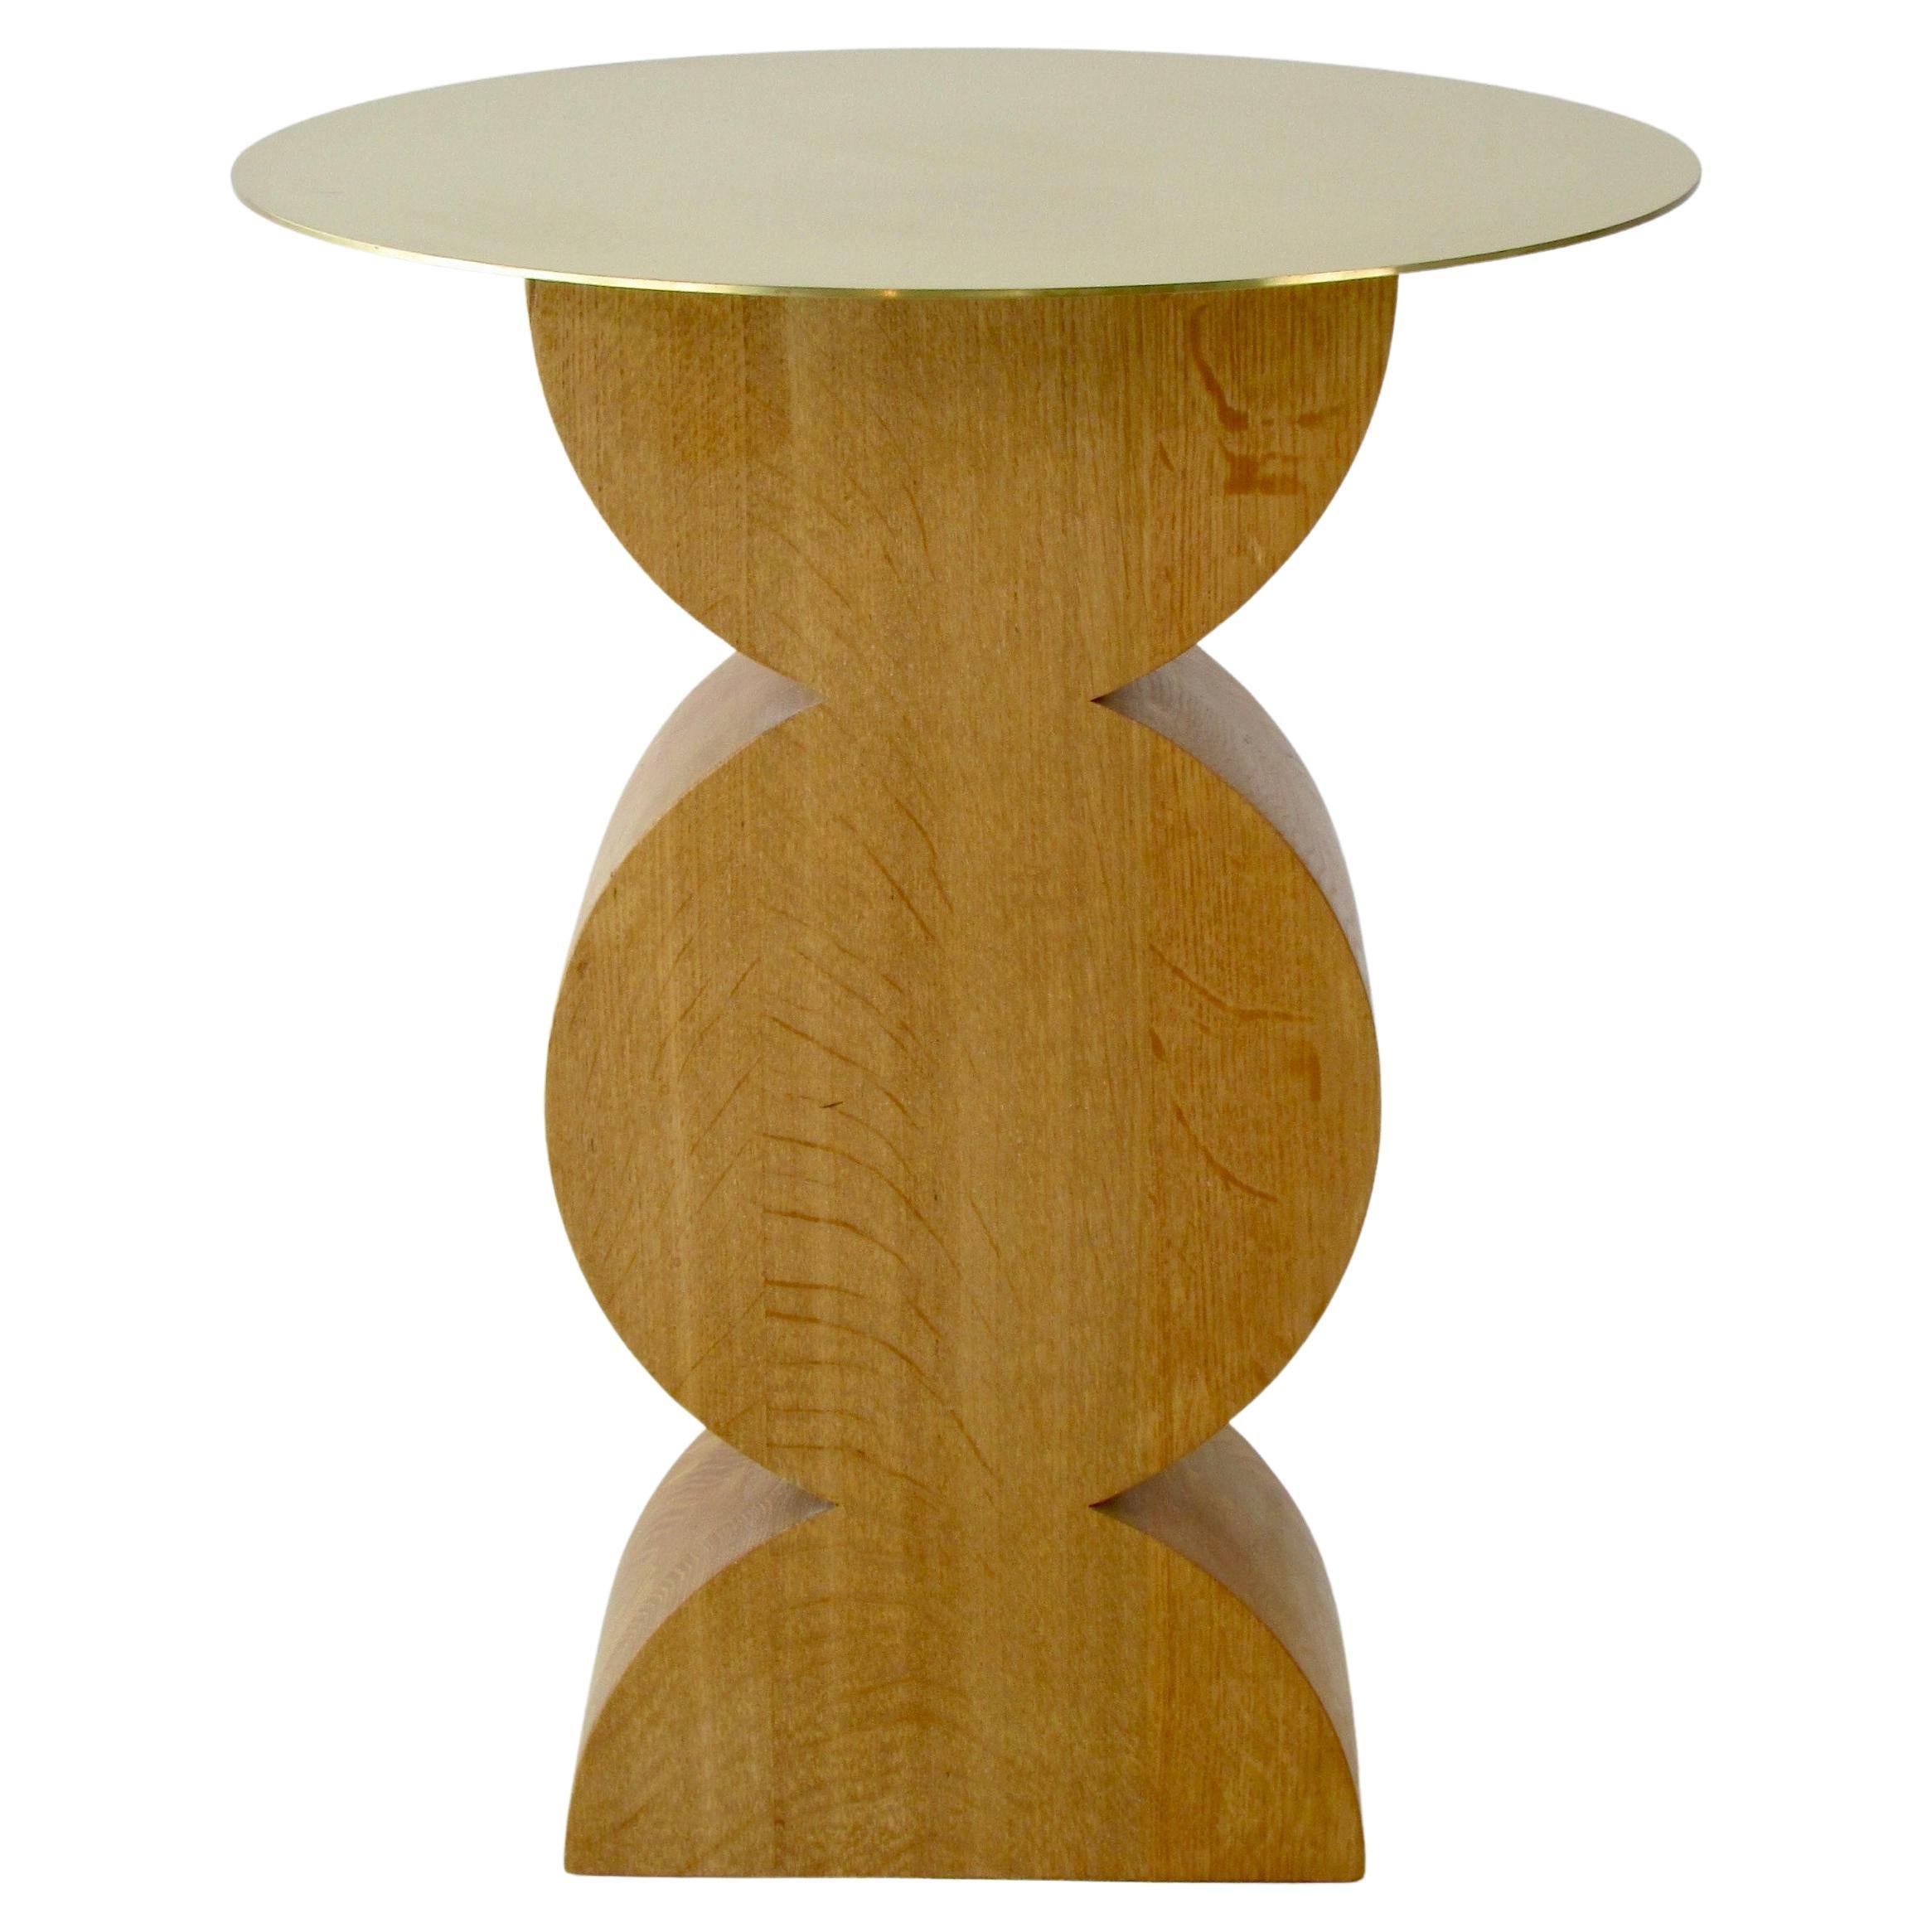 Studio Simon Constantin occasional table in oak wood with a polished brass top. The brass top appears to be floating on the thickset wood base. Italy, 1971 / 2013
Base measures 10.75w x 6.5d Italy 1971 / 2013
Table will be shipped with top removed.
